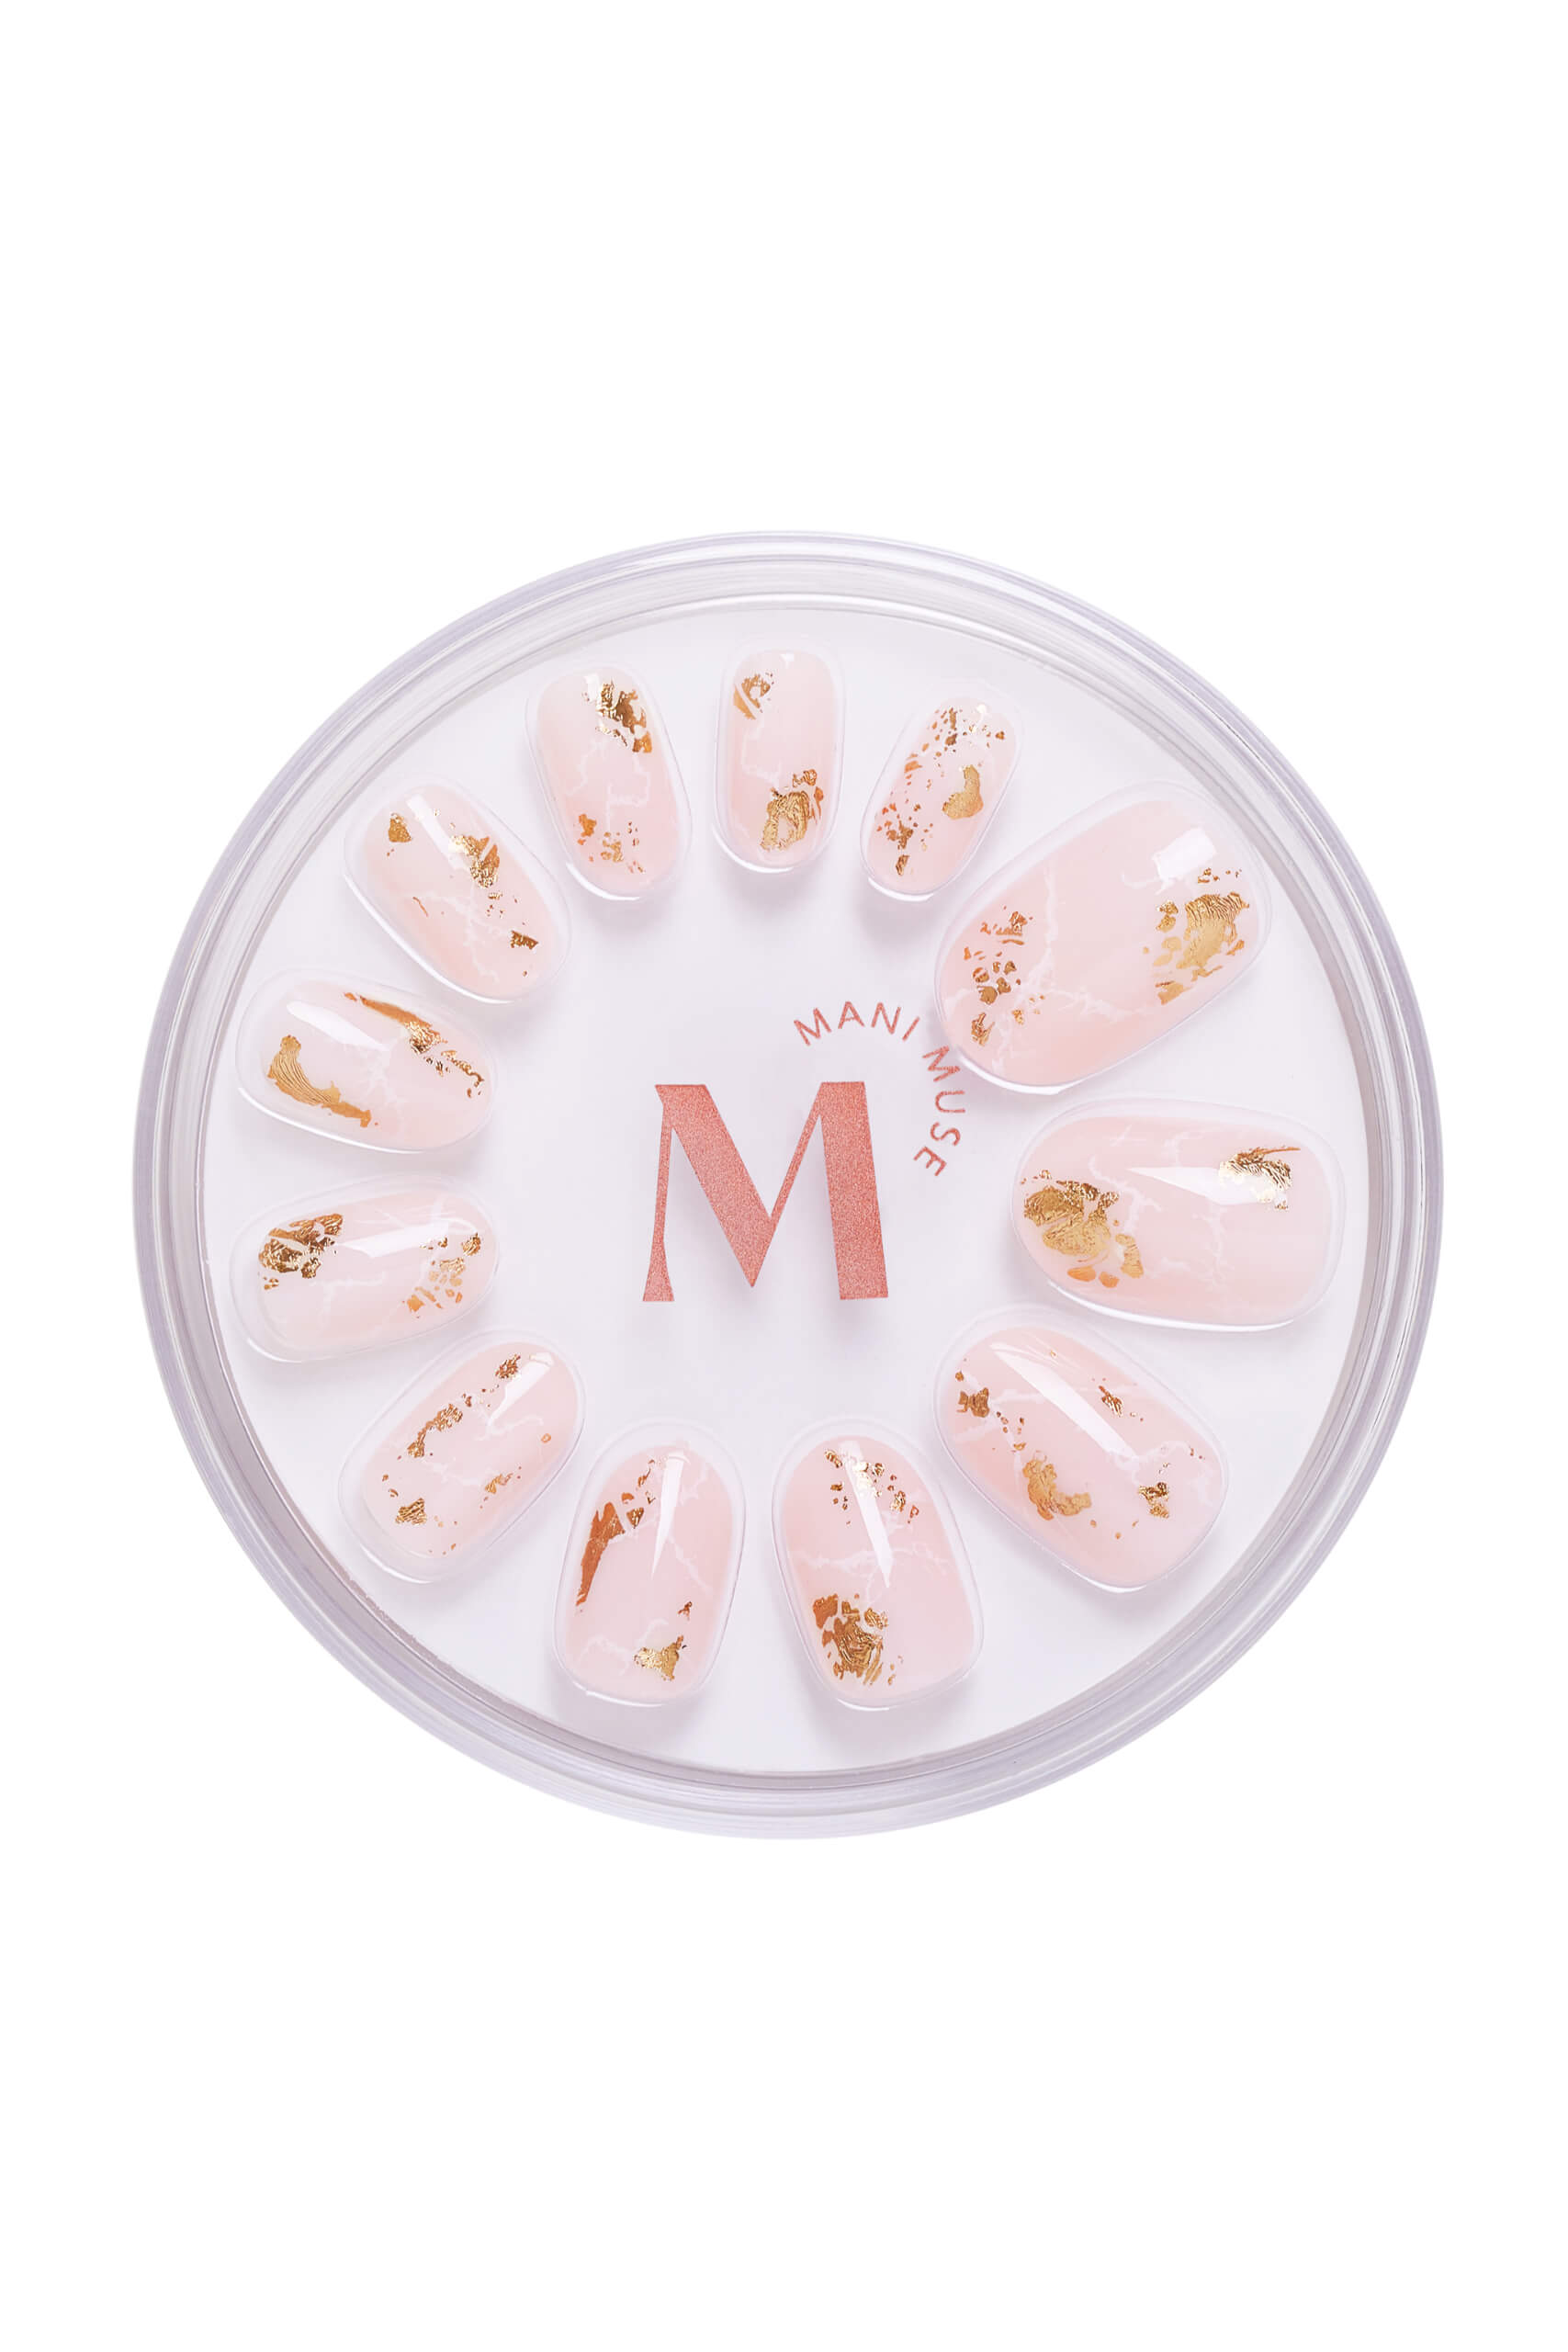 Mani Muse You're A Gem Press-on Nails 